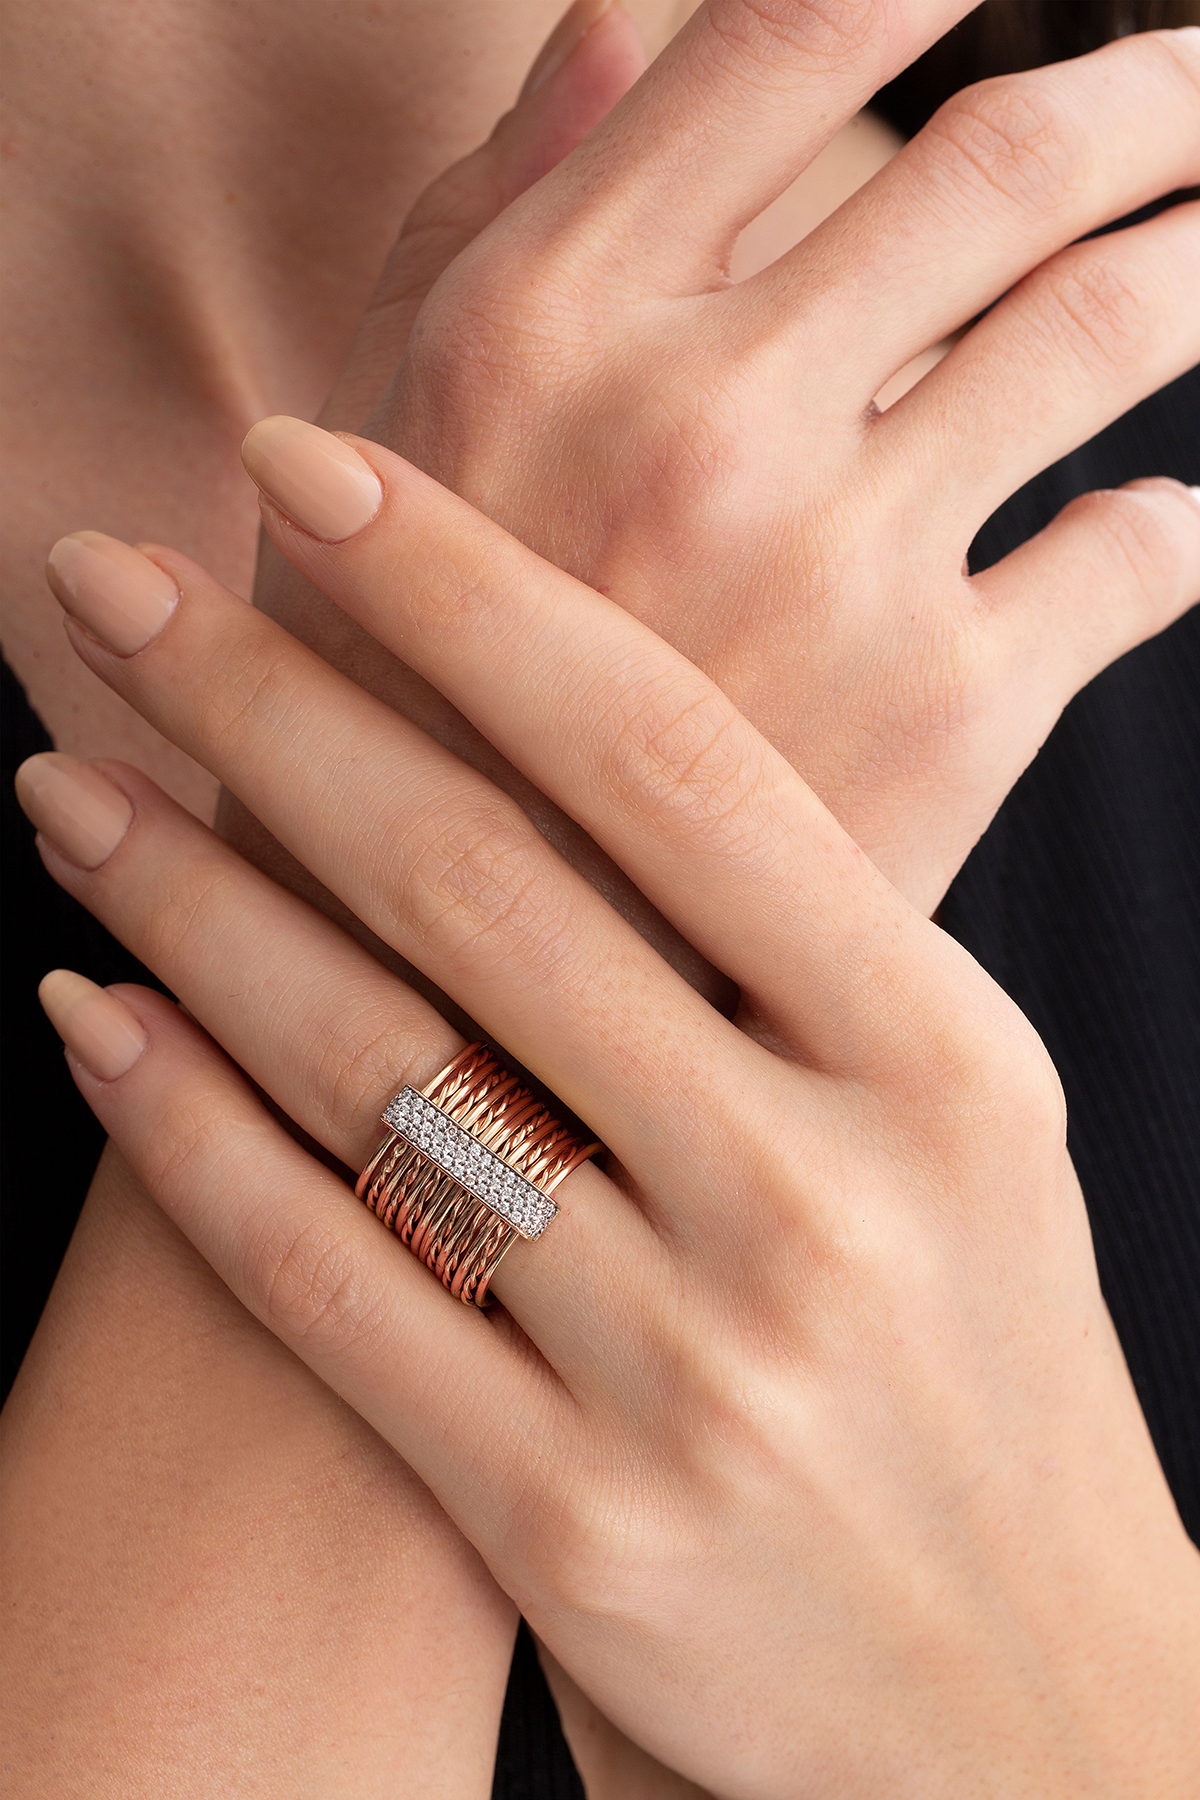 Attached Coils Ring in Rose Gold - Her Story Shop